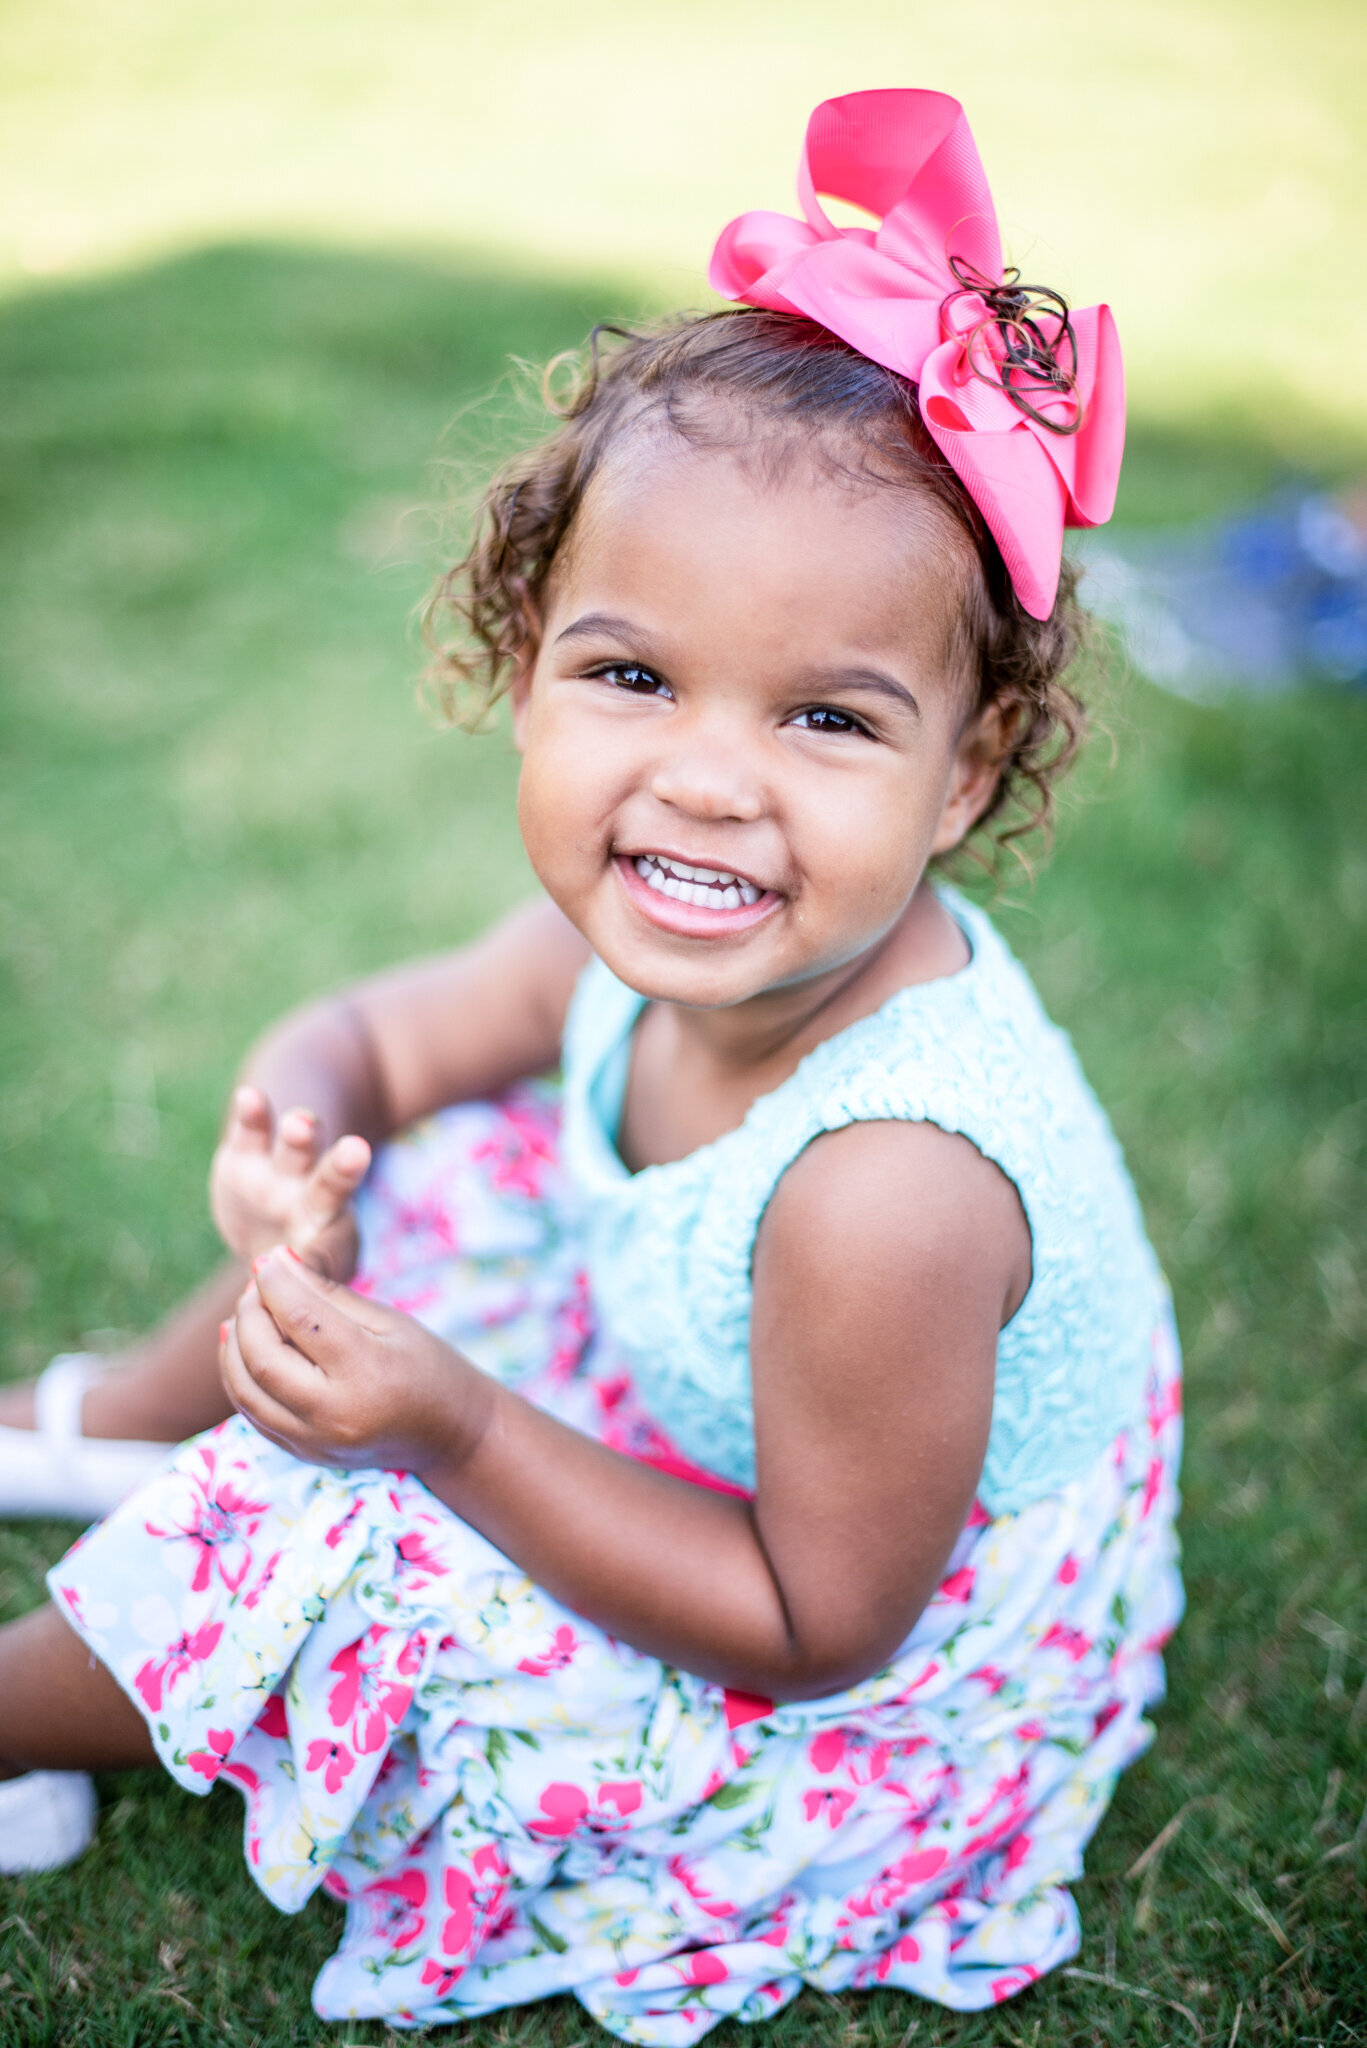 young girl in a white and pink floral dress with a large pink bow on her head sitting in the grass smiling at the camera photographed by Millz Photography in Greenville, SC